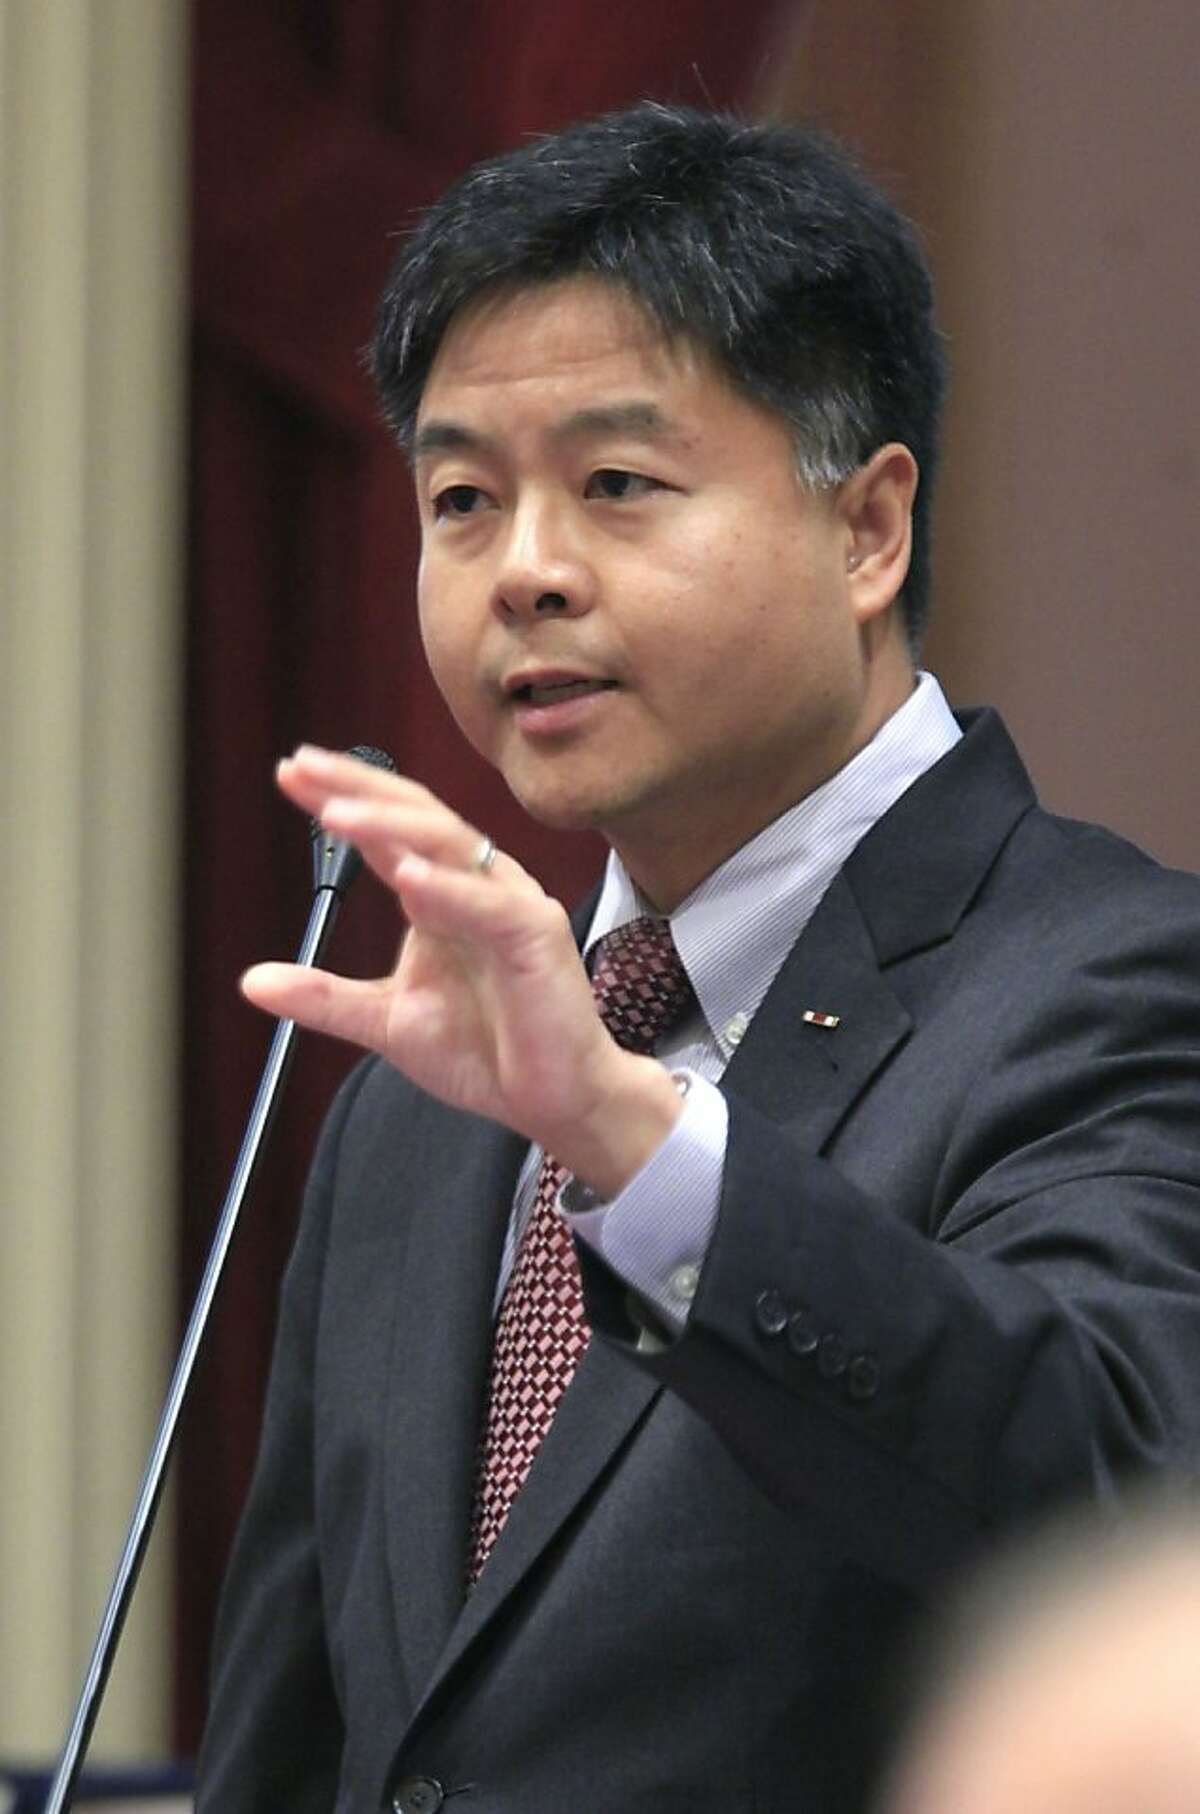 FILE- This file photo taken Sept. 9, 2011, shows California State Sen. Ted Lieu , D-Torrance , as he speaks before the Senate at the Capitol in Sacramento, Calif. Lieu is considering calling for a boycott of Lowe's stores after the home improvement chain pulled its advertising from a reality show about Muslim-Americans. Calling the retail giant's decision "naked religious bigotry," Lieu said Sunday, Dec. 11, 2011, he would also consider legislative action if Lowe's doesn't apologize to Muslims and reinstate its ads. (AP Photo/Rich Pedroncelli, File)